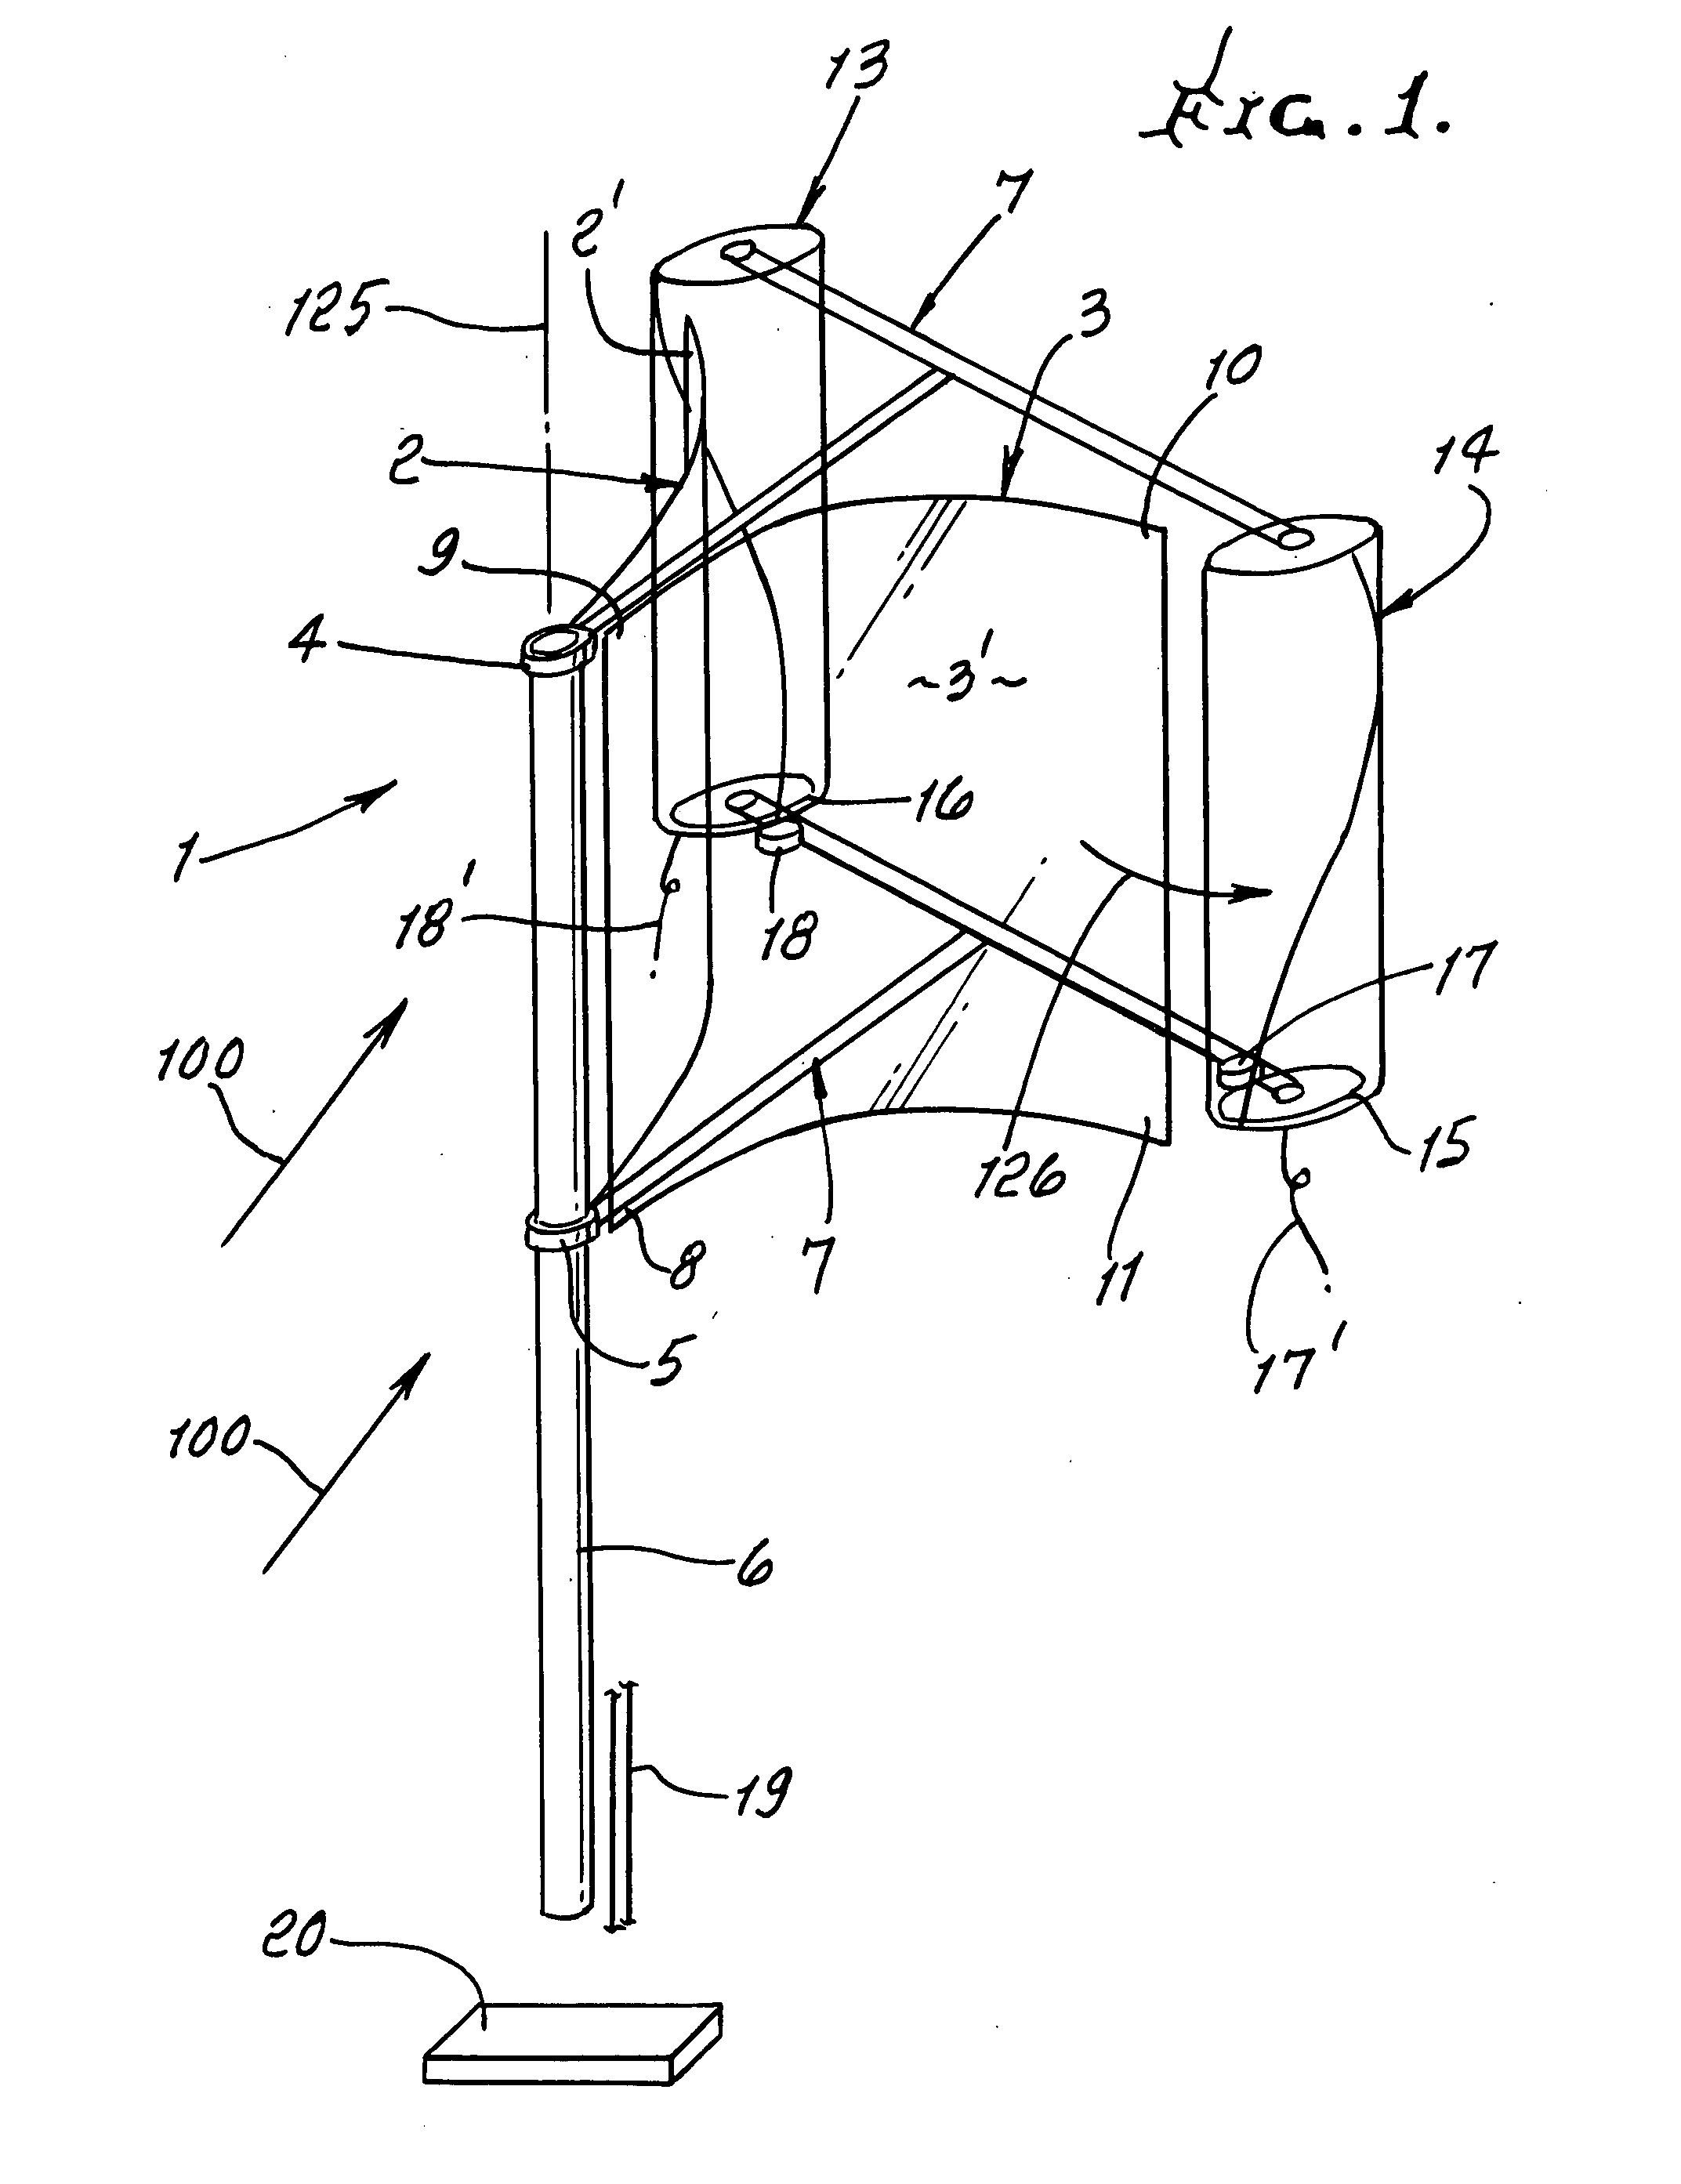 Wind power converting apparatus and method